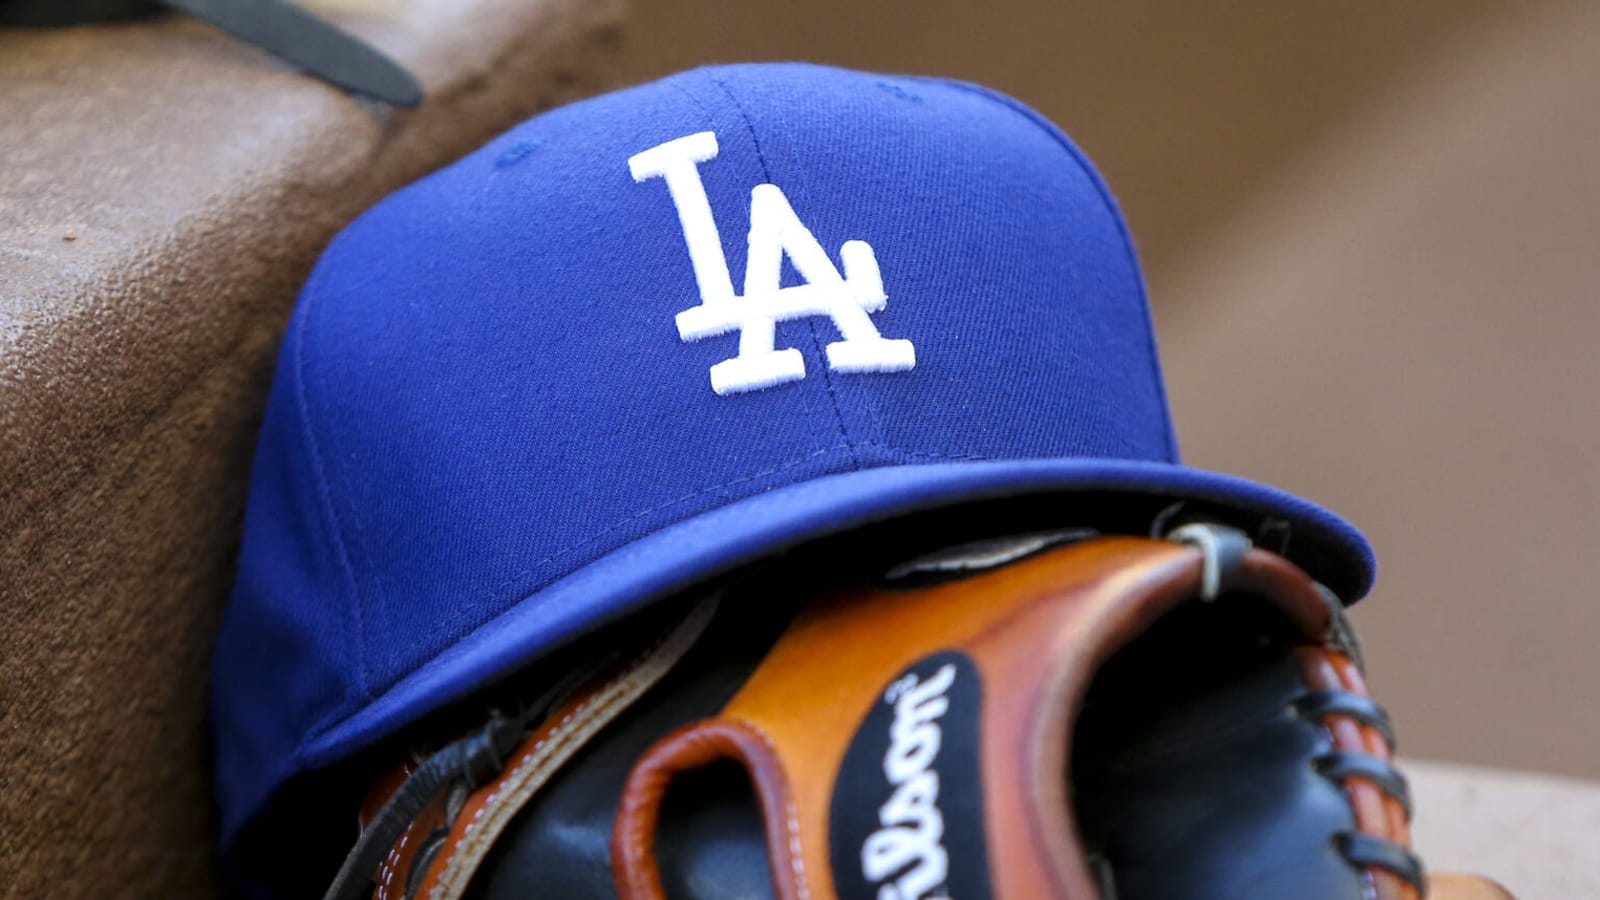 Dodgers disinvite group from Pride Night after backlash